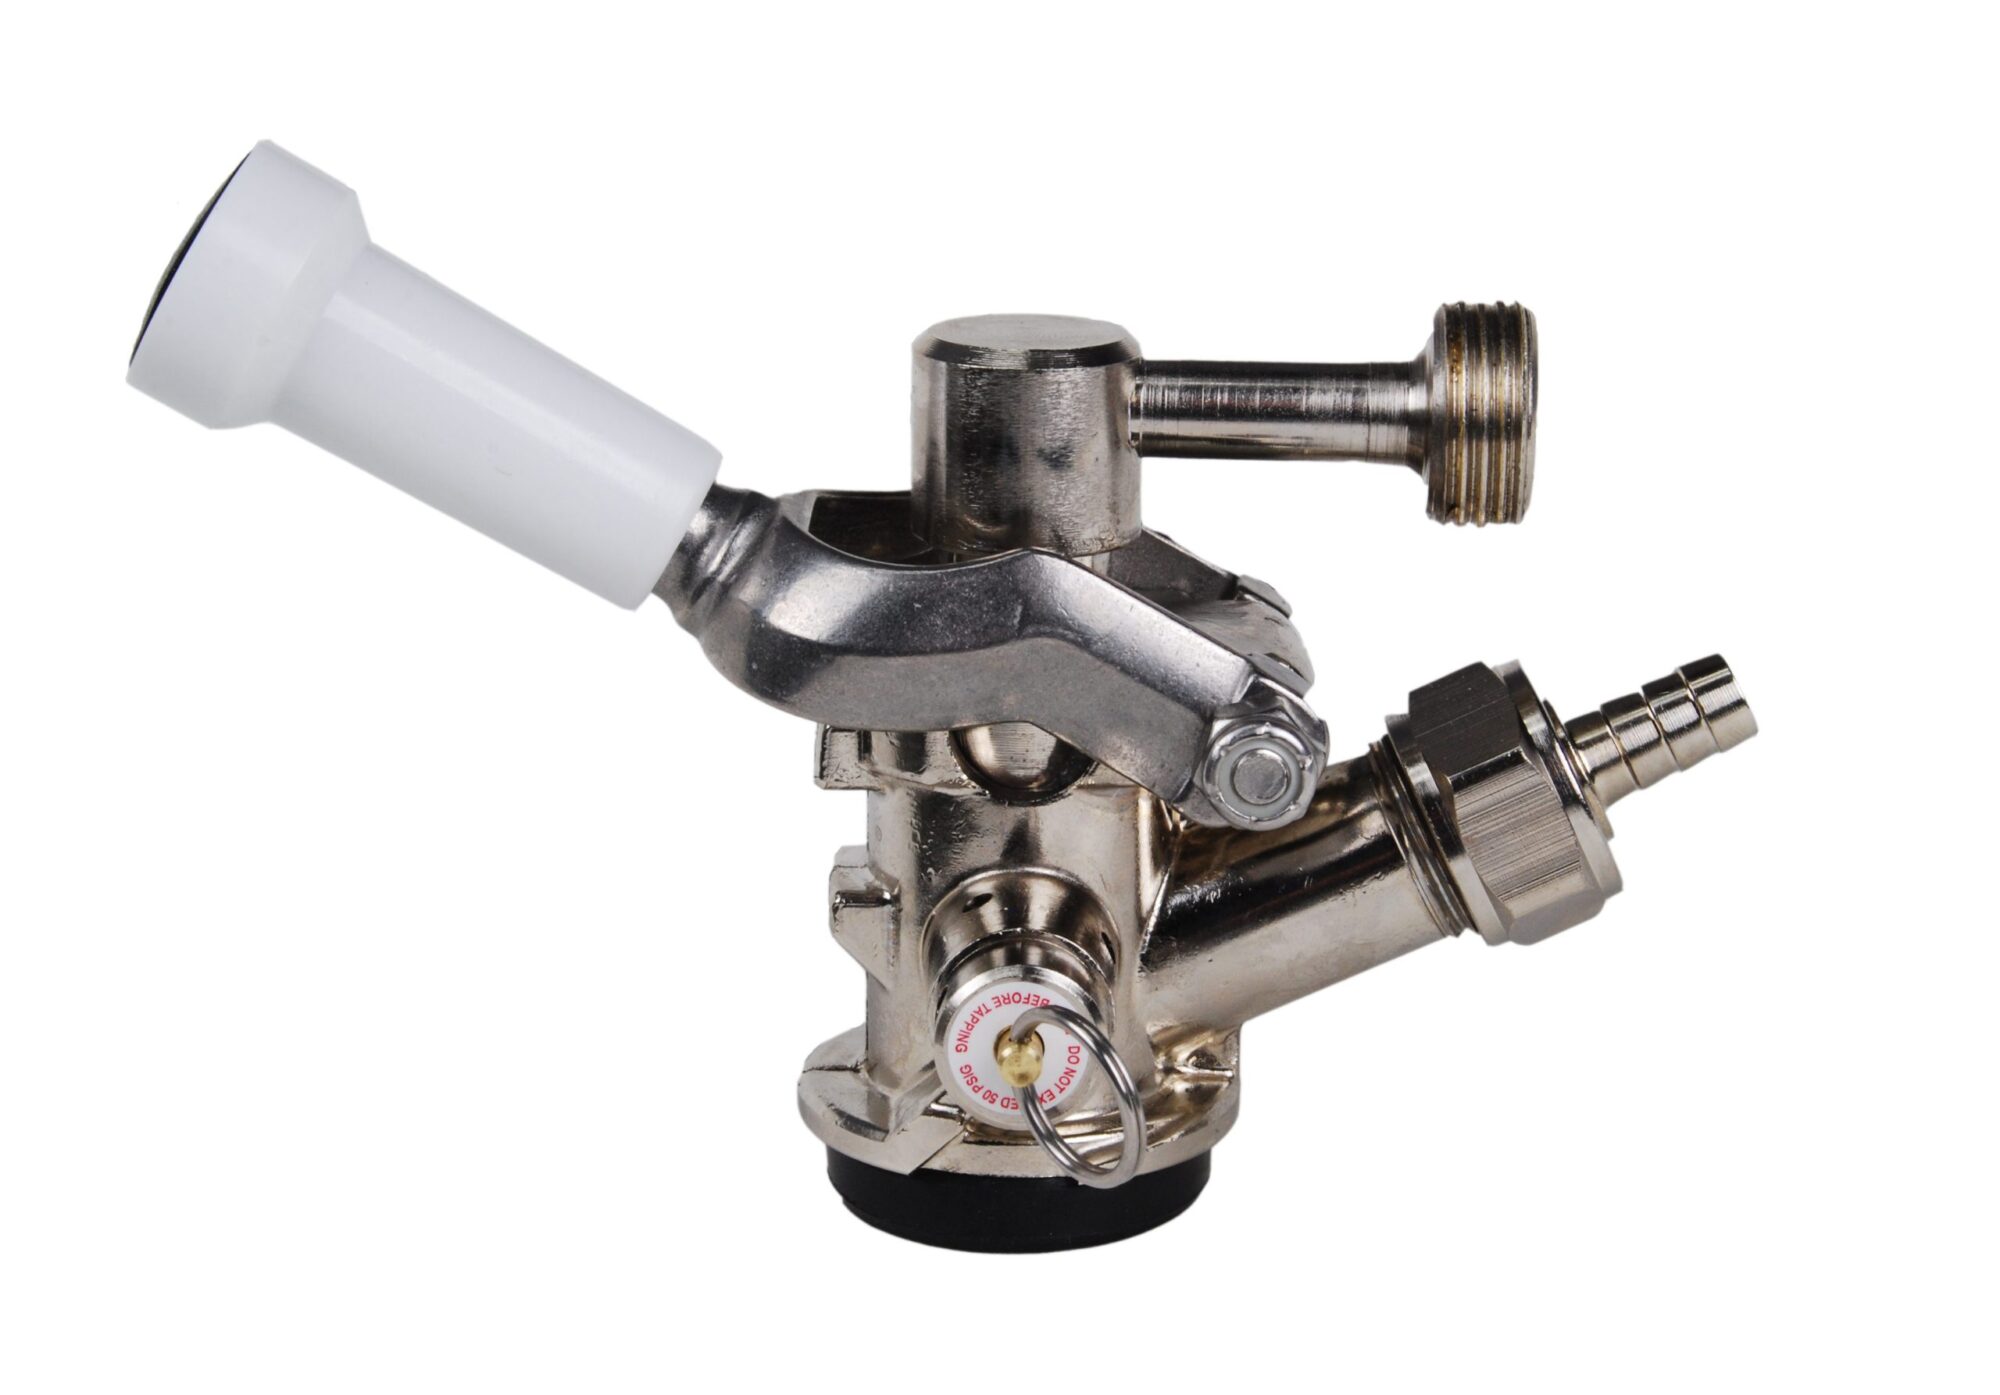 55LBM Plated Body with Plated Swivel Probe and White Lever Handle - Side Dispensing "D" System